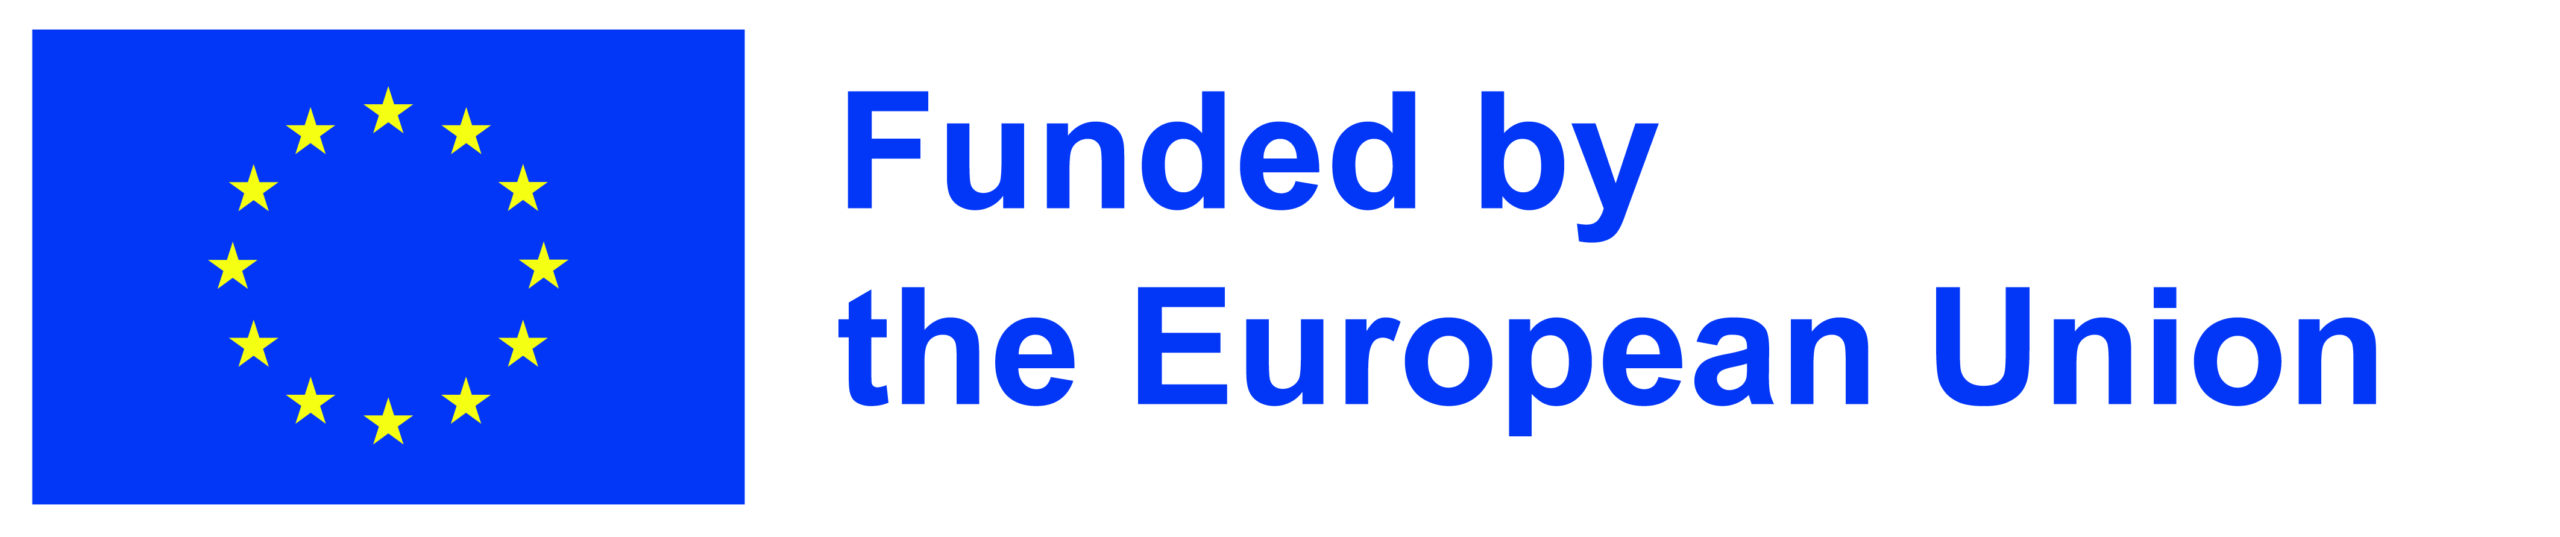 The SUSTAIN A PRINT project has received funding from the European Union’s Horizon Europe research and innovation funding programme under Grant Agreement No 101070556.  Grant amount: 4 135 317.50 euros. Grant to ITENE: 427, 250 euros.